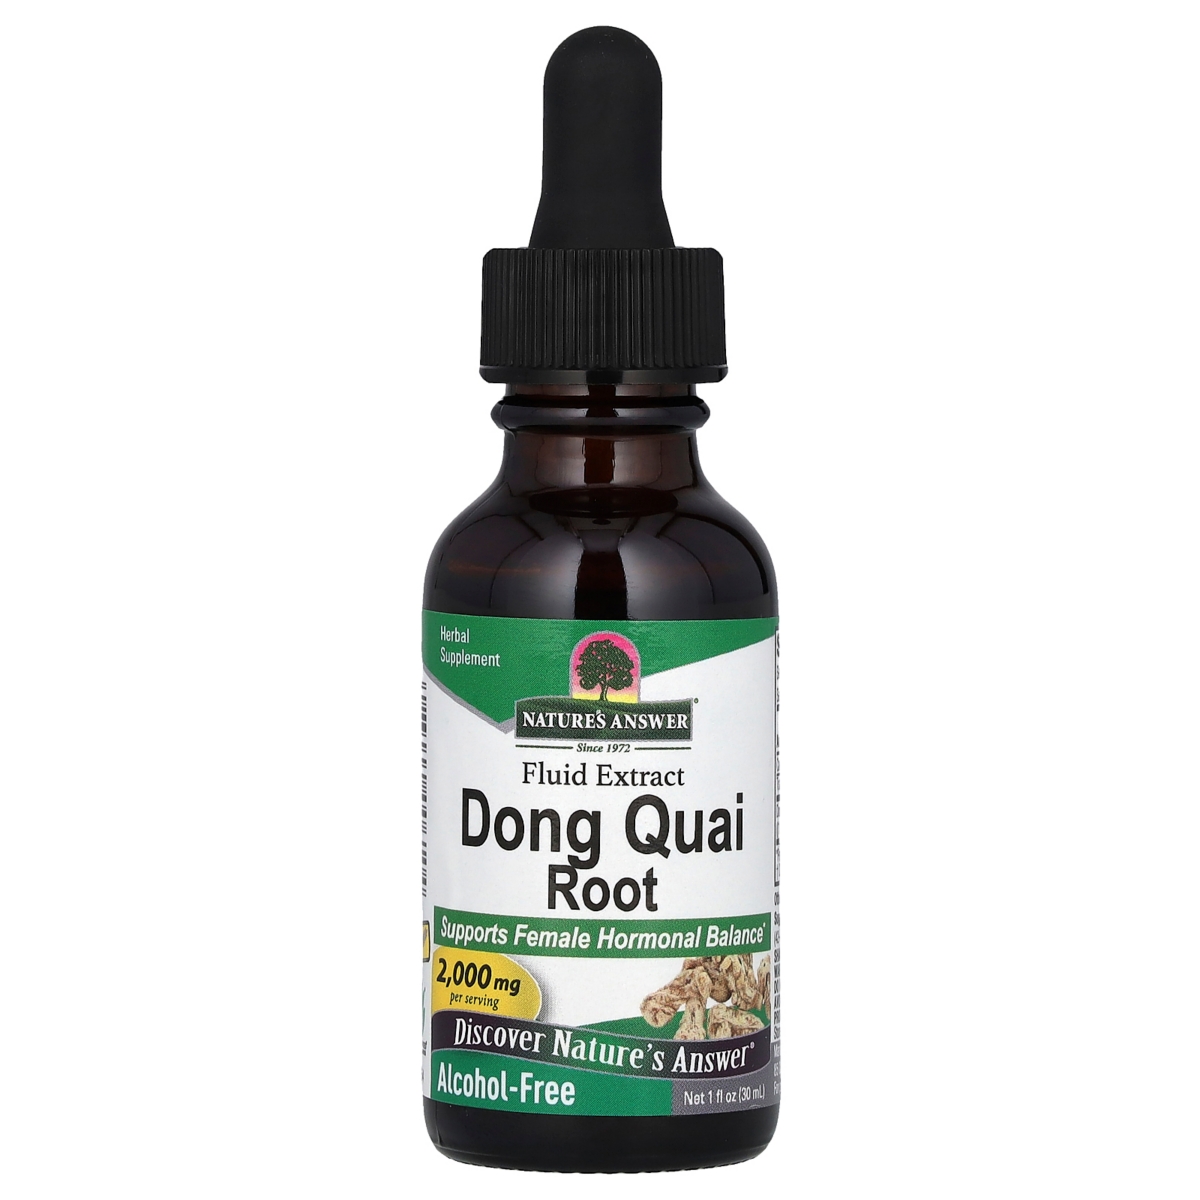 Dong Quai Root Fluid Extract Alcohol Free 2 000 mg - 1 fl oz (30 ml) - Assorted Pre-pack (See Table